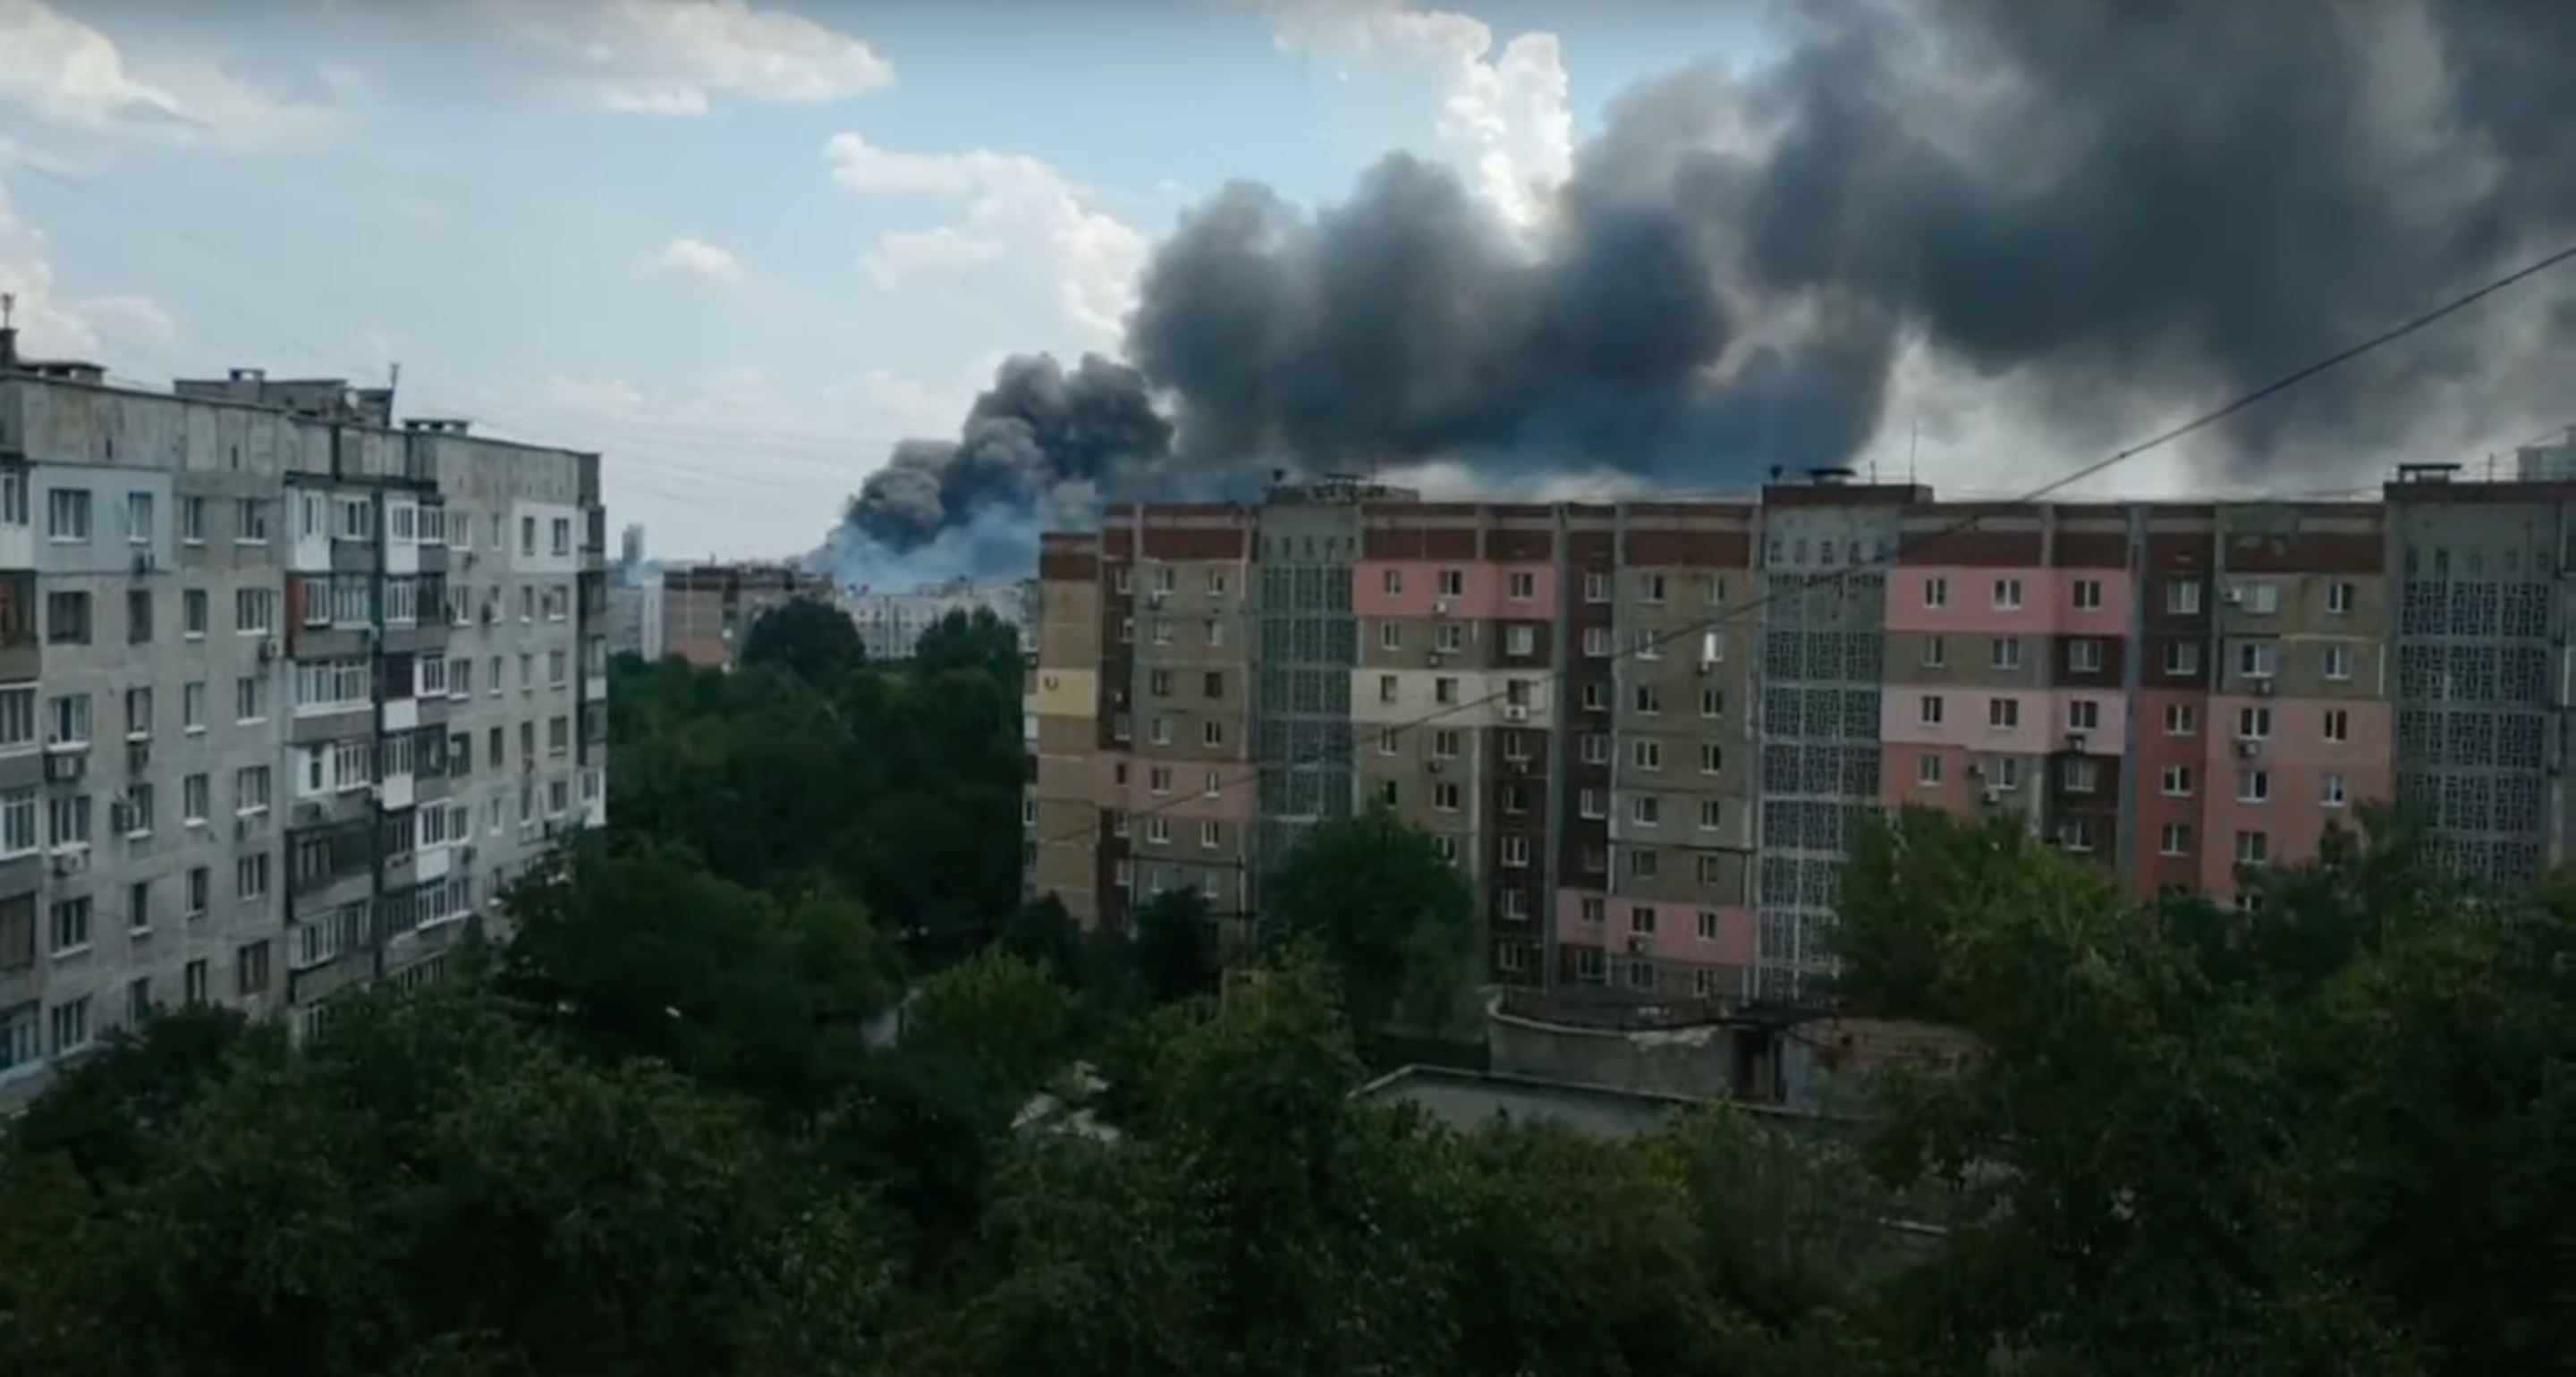 Is the US HIMARS working again? One of the largest Russian weapons depots burns in occupied Donetsk